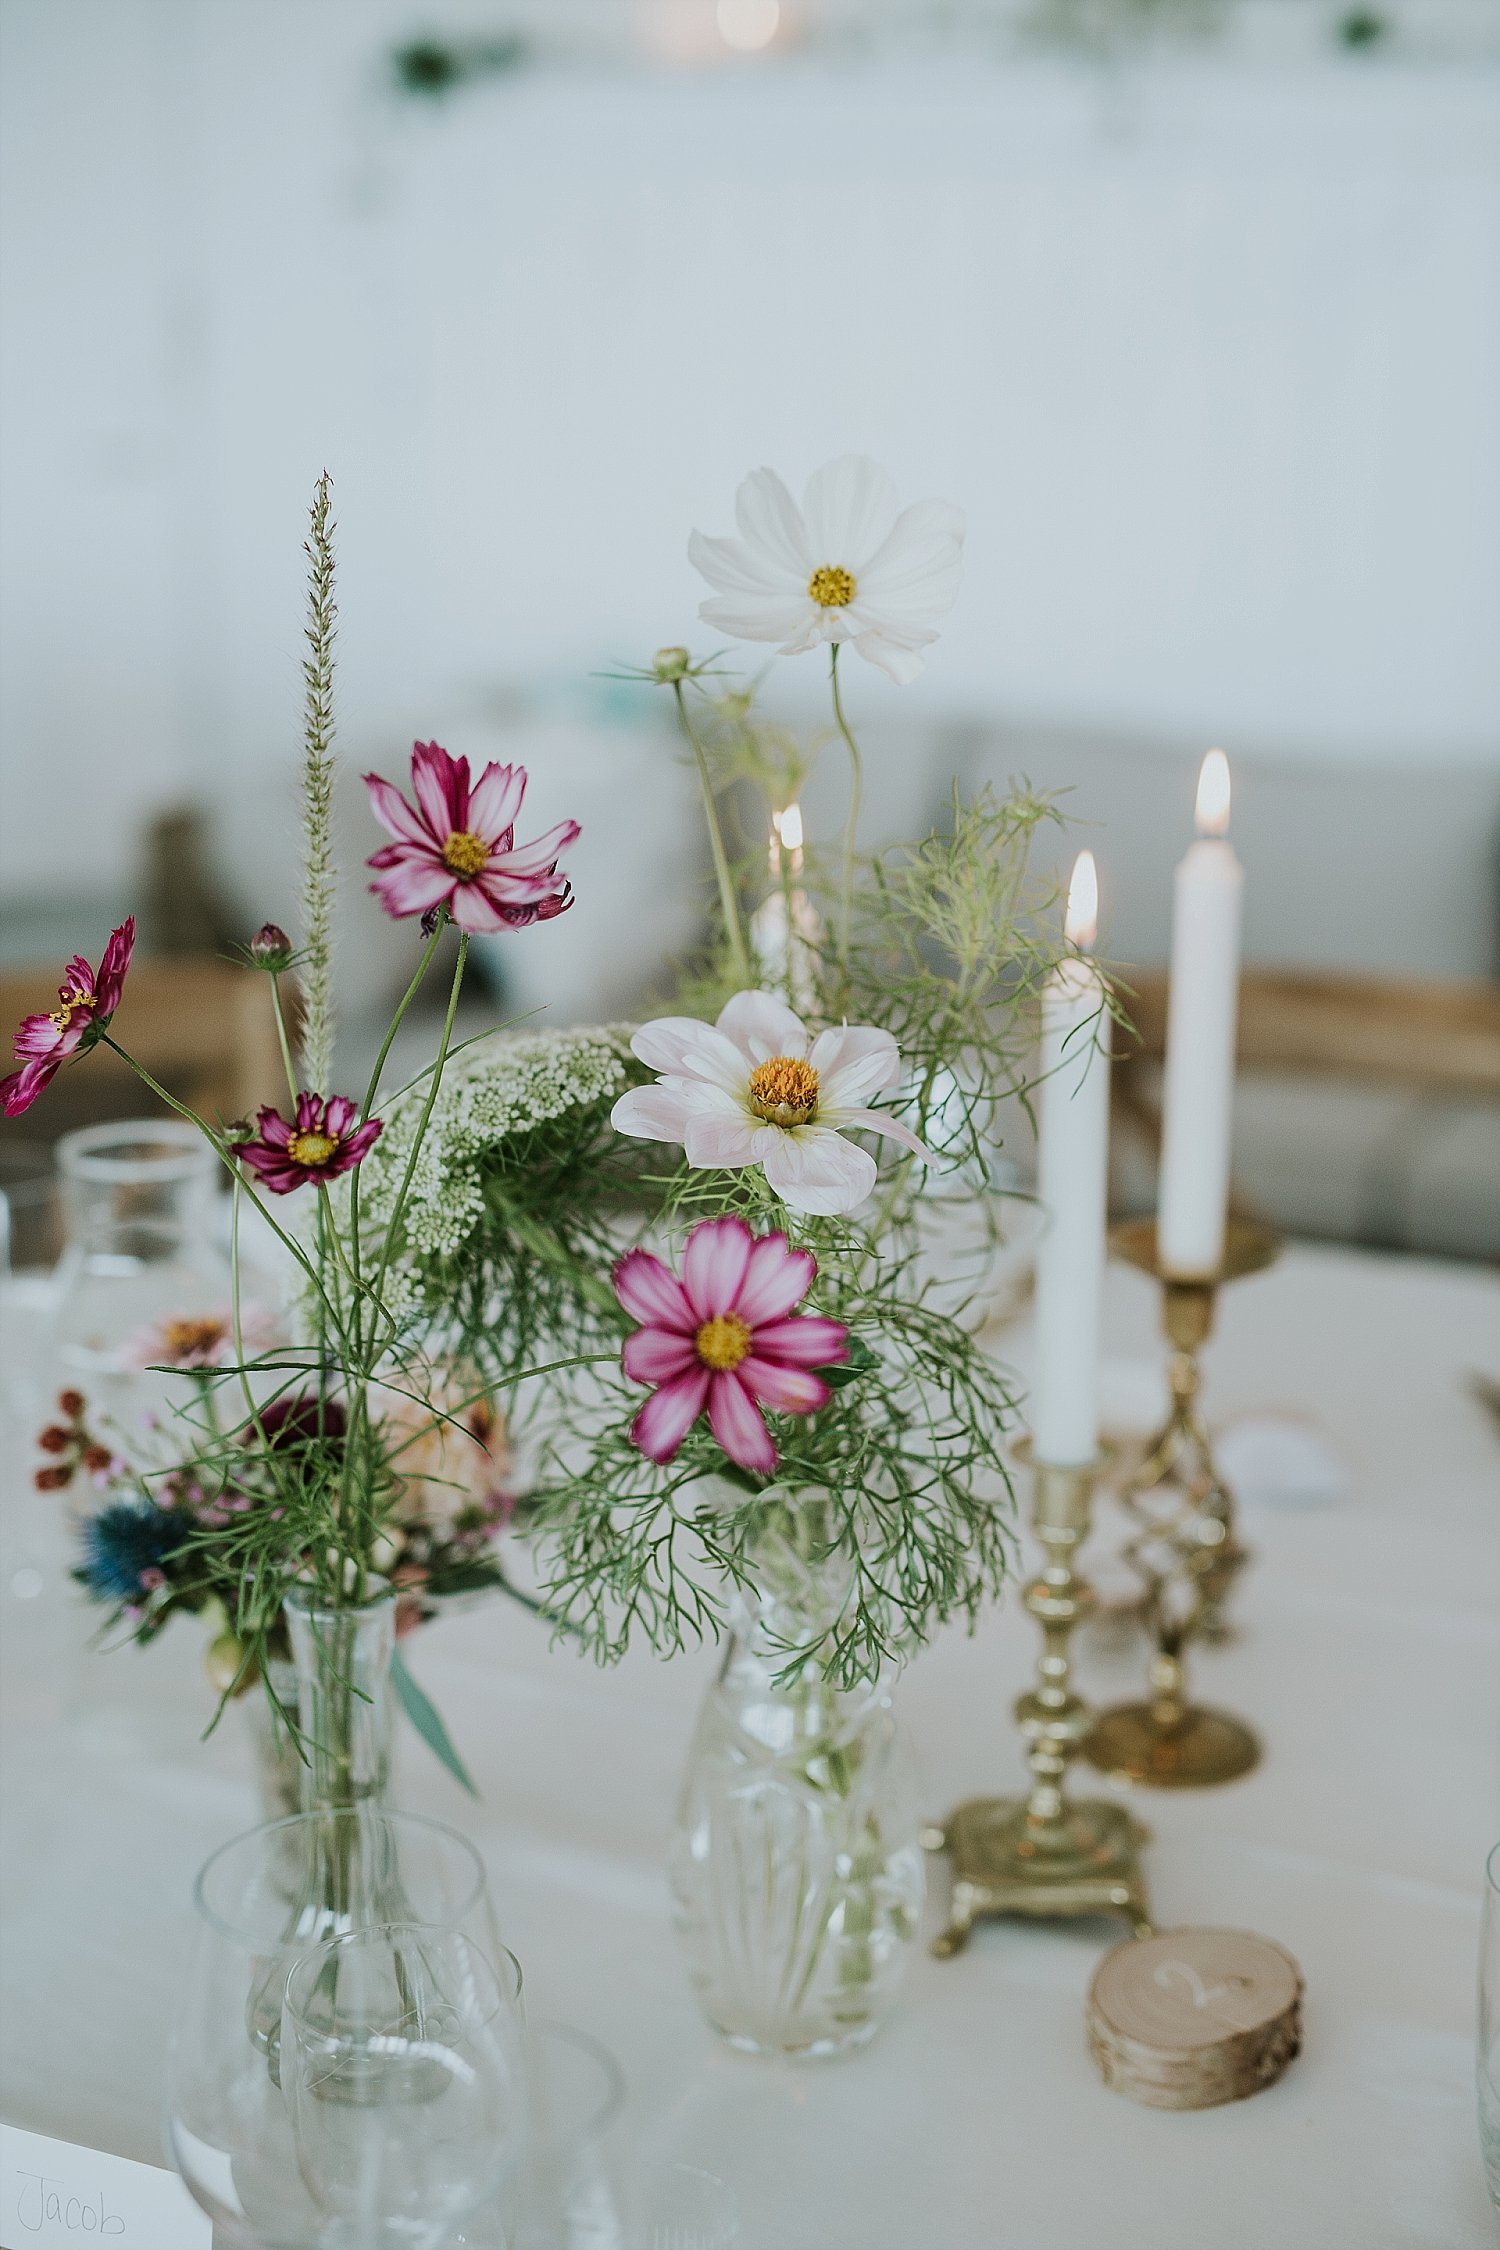 simple garden wedding floral arrangements in glass vases on table with candles | Aero Island | Danish Island Weddings | Full service Denmark wedding planners